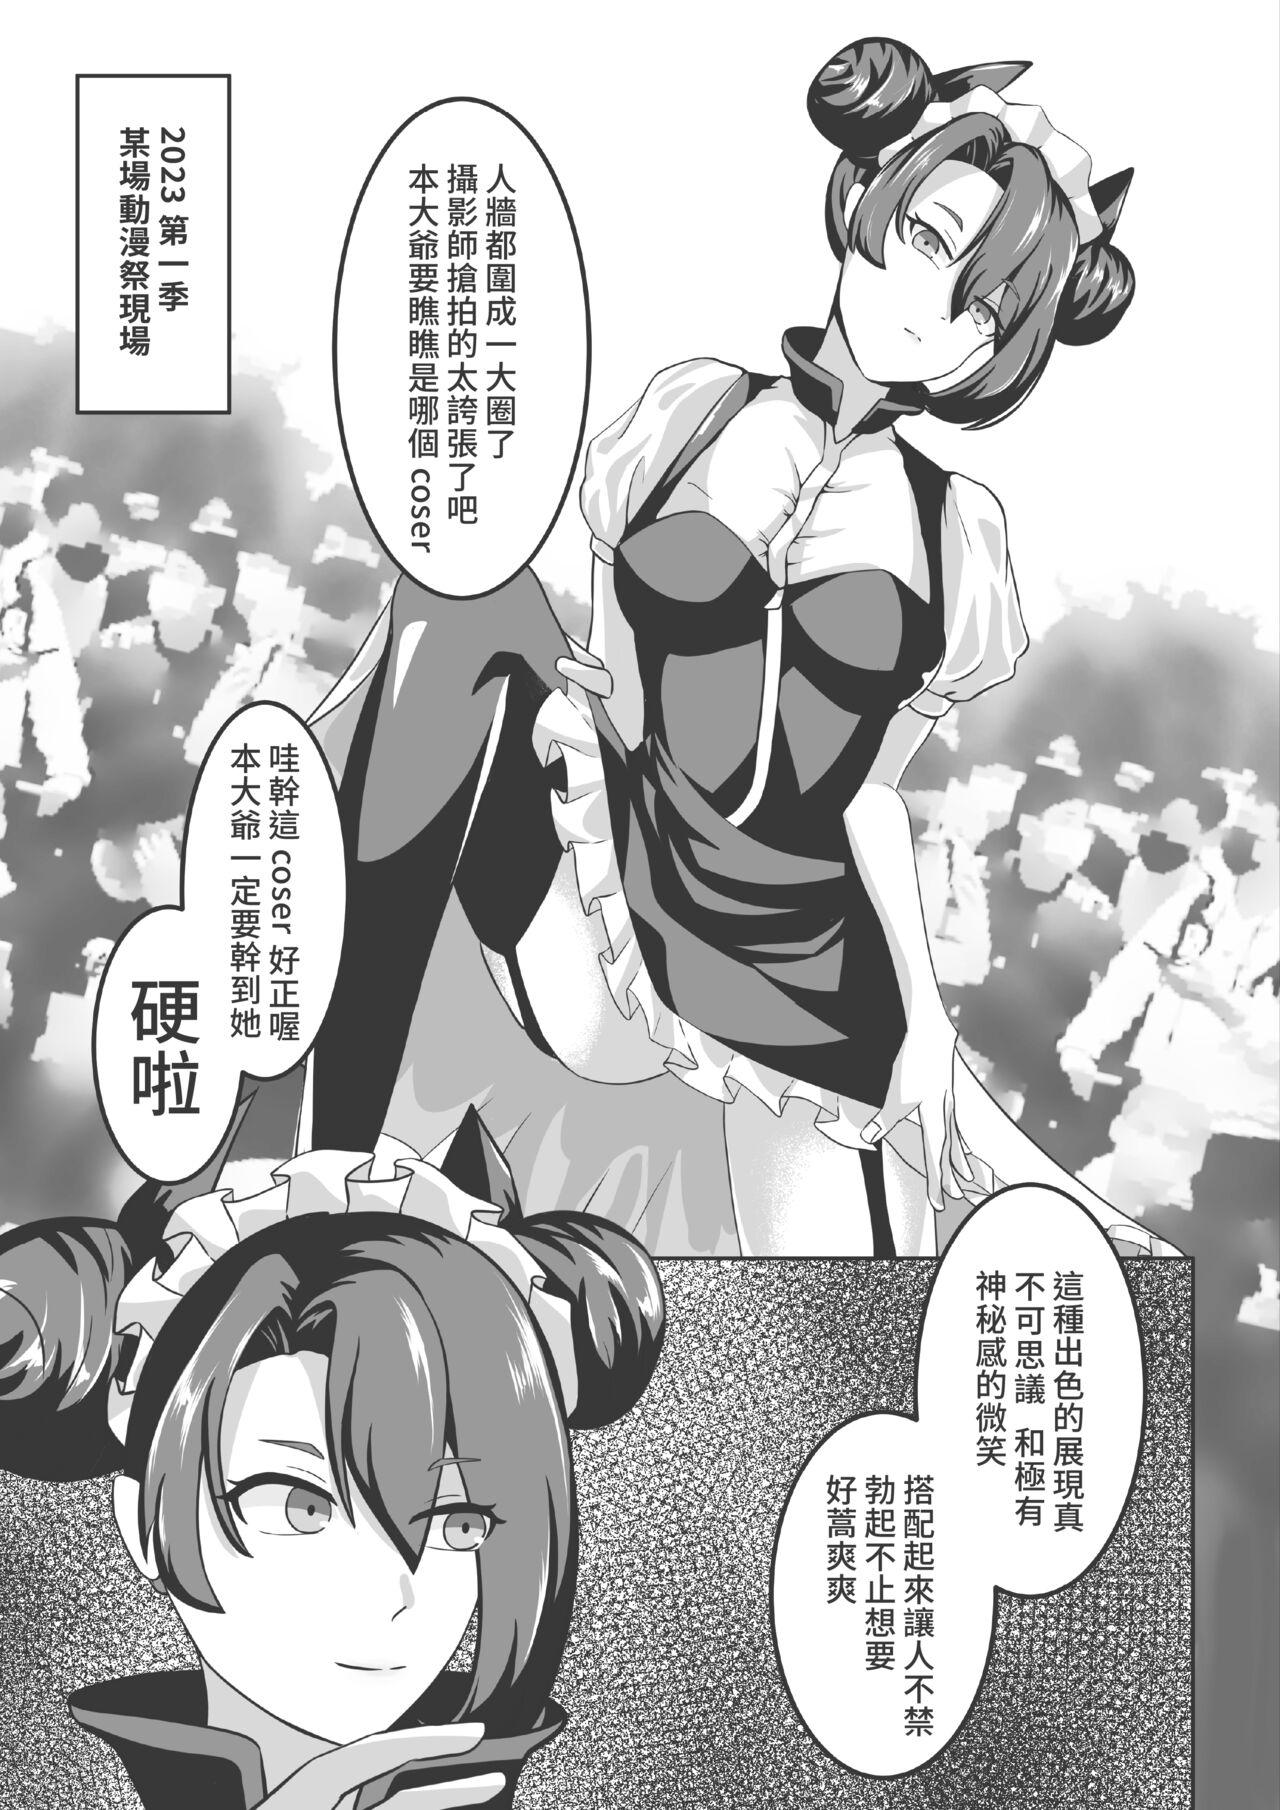 Foda Sex with Agent - Girls frontline Anal Play - Page 2